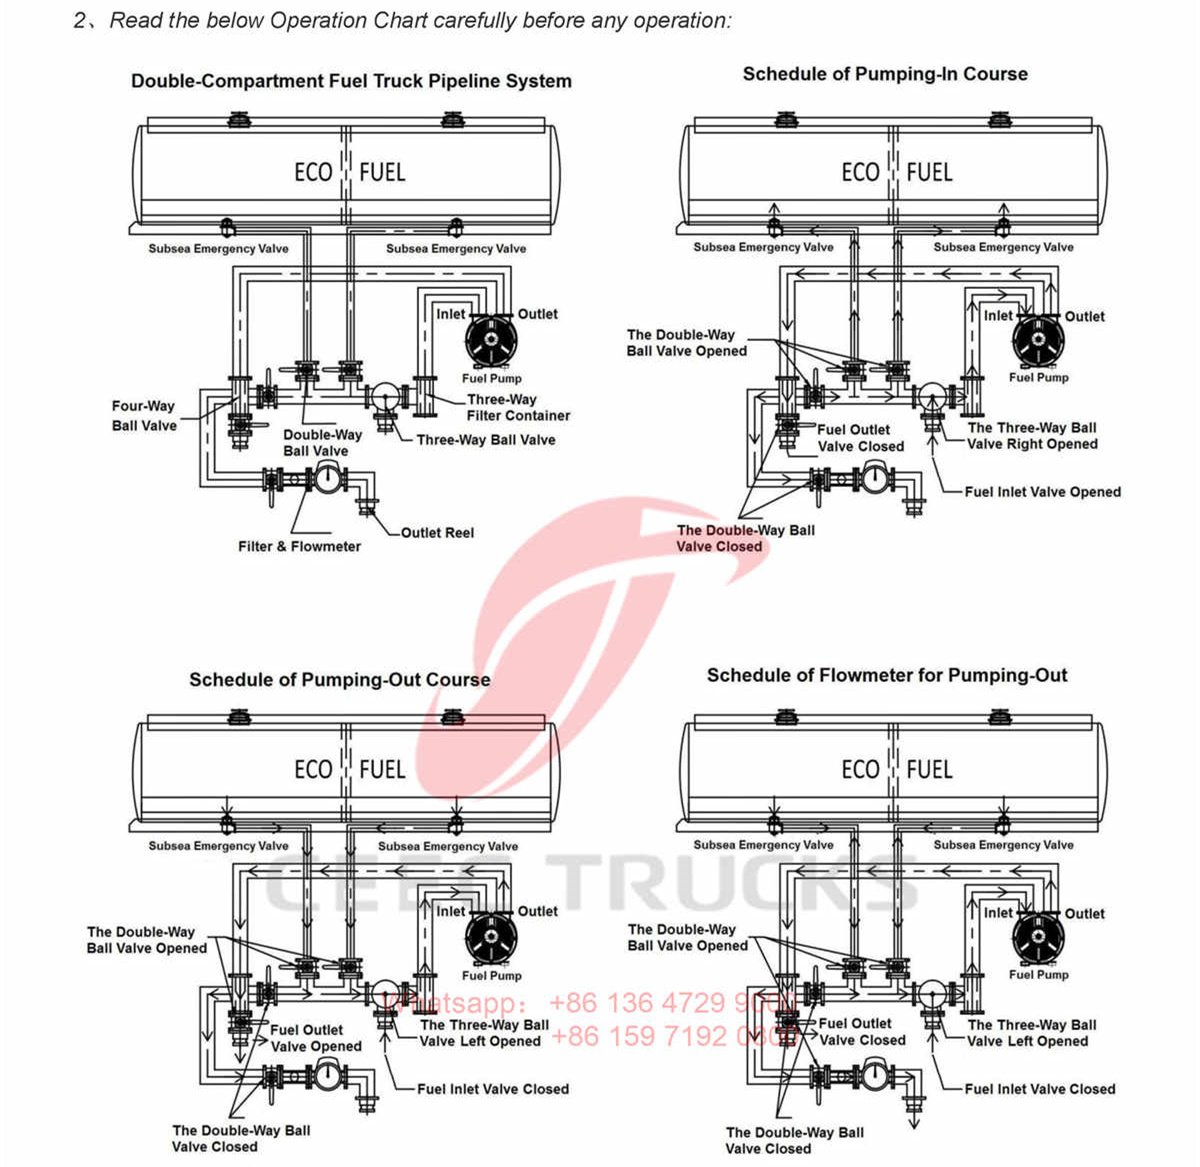 How to use beiben fuel tanker trucks?